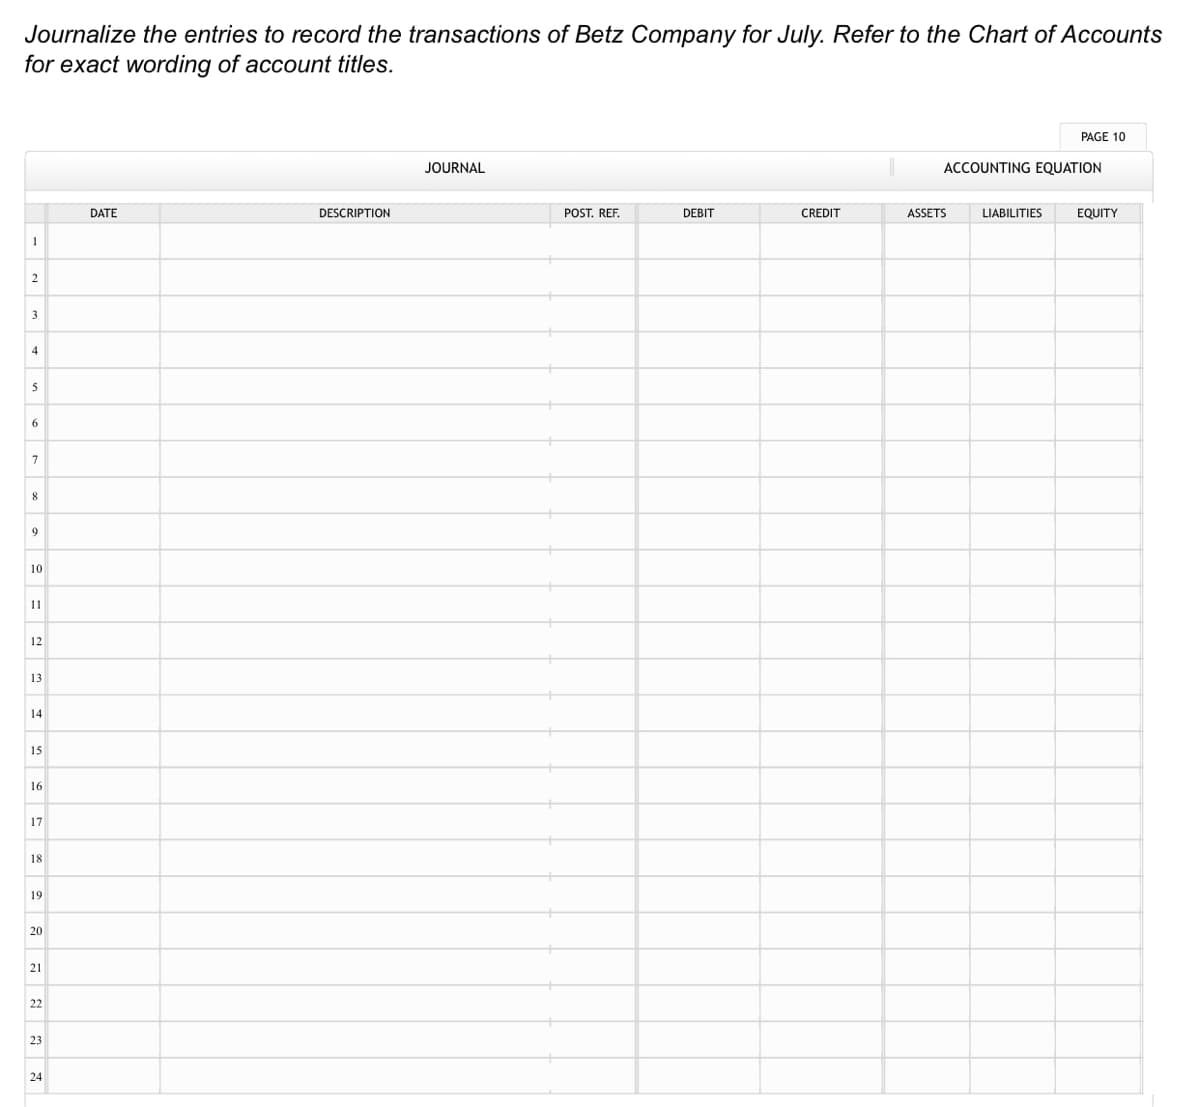 Journalize the entries to record the transactions of Betz Company for July. Refer to the Chart of Accounts
for exact wording of account titles.
PAGE 10
JOURNAL
ACCOUNTING EQUATION
DATE
DESCRIPTION
POST. REF.
DEBIT
CREDIT
ASSETS
LIABILITIES
EQUITY
1
2
3
4
5
6
8
9
10
11
12
13
14
15
16
17
18
19
20
21
22
23
24
